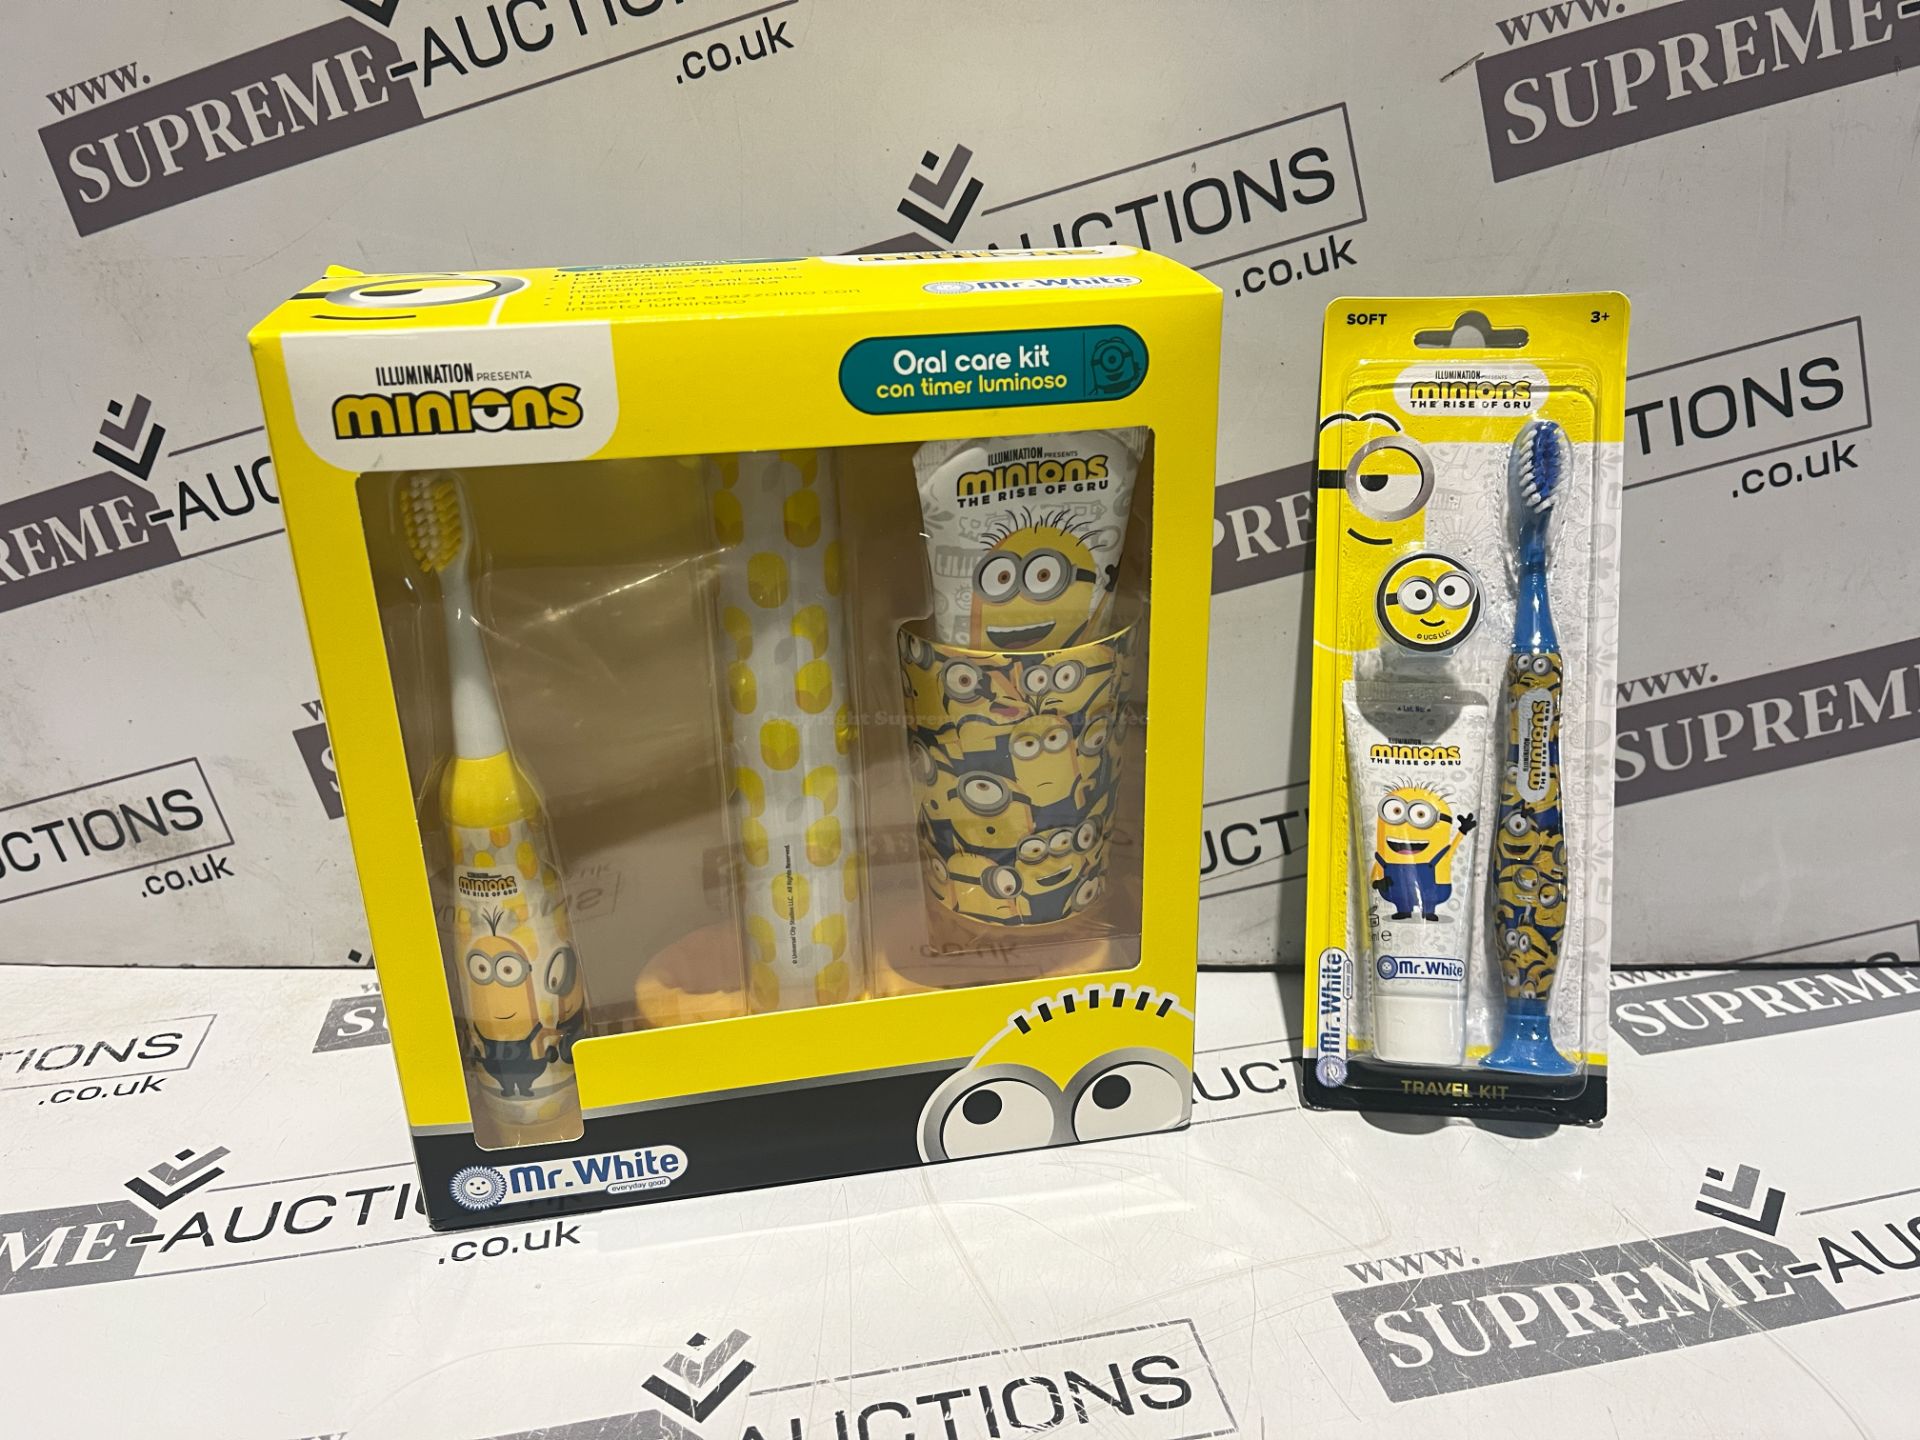 10 X BRAND NEW 2 PIECE CHILDRENS MINIONS ORAL CARE SETS INCLUDING TRAVEL KIT AND ELECTRIC TOOTHBRUSH